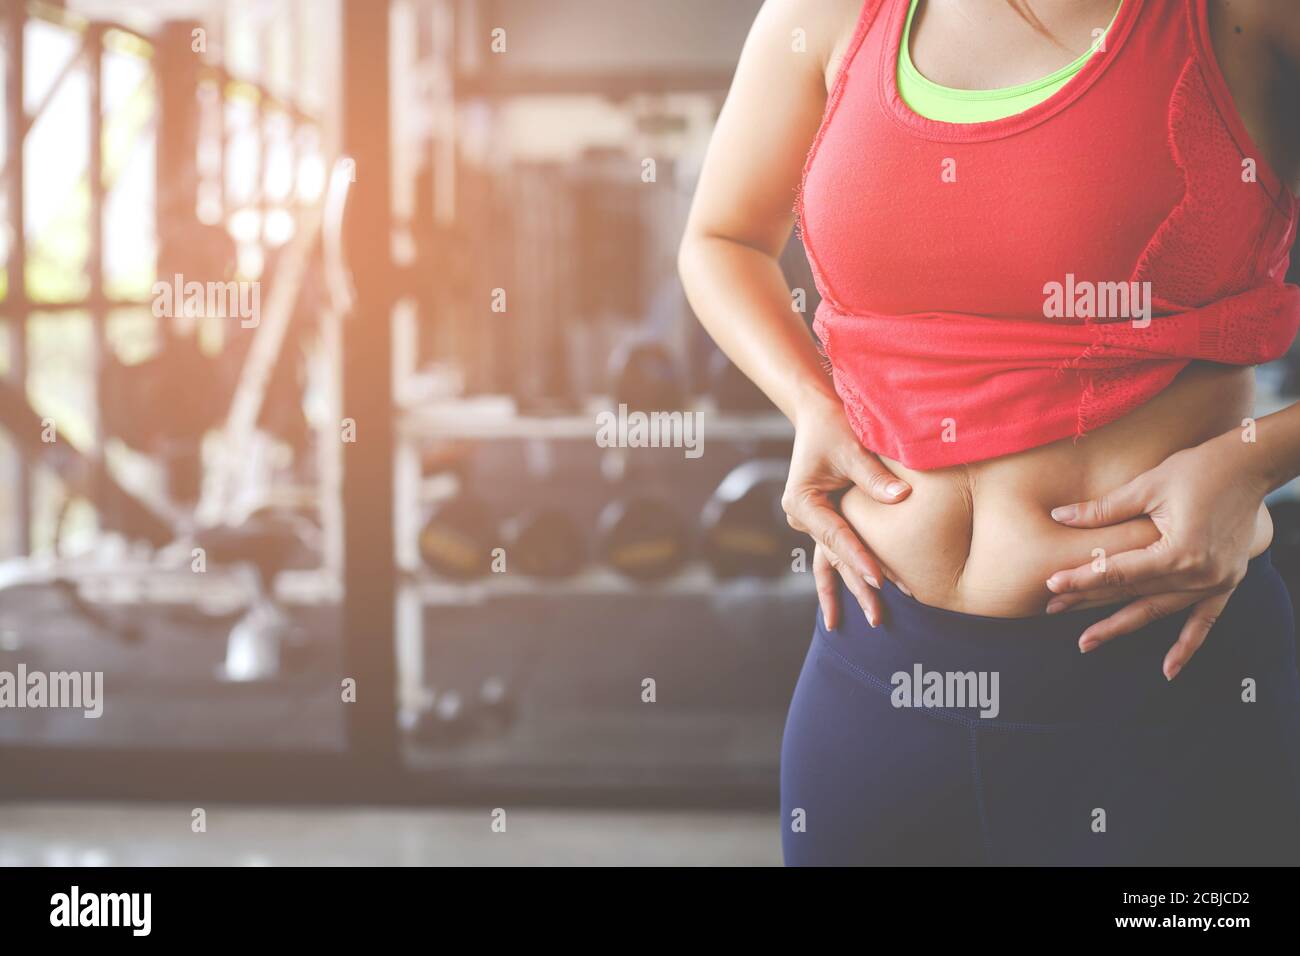 Fat woman, Obese woman hand holding excessive belly fat isolated on gym background, Overweight fatty belly of woman, Woman diet lifestyle concept to r Stock Photo